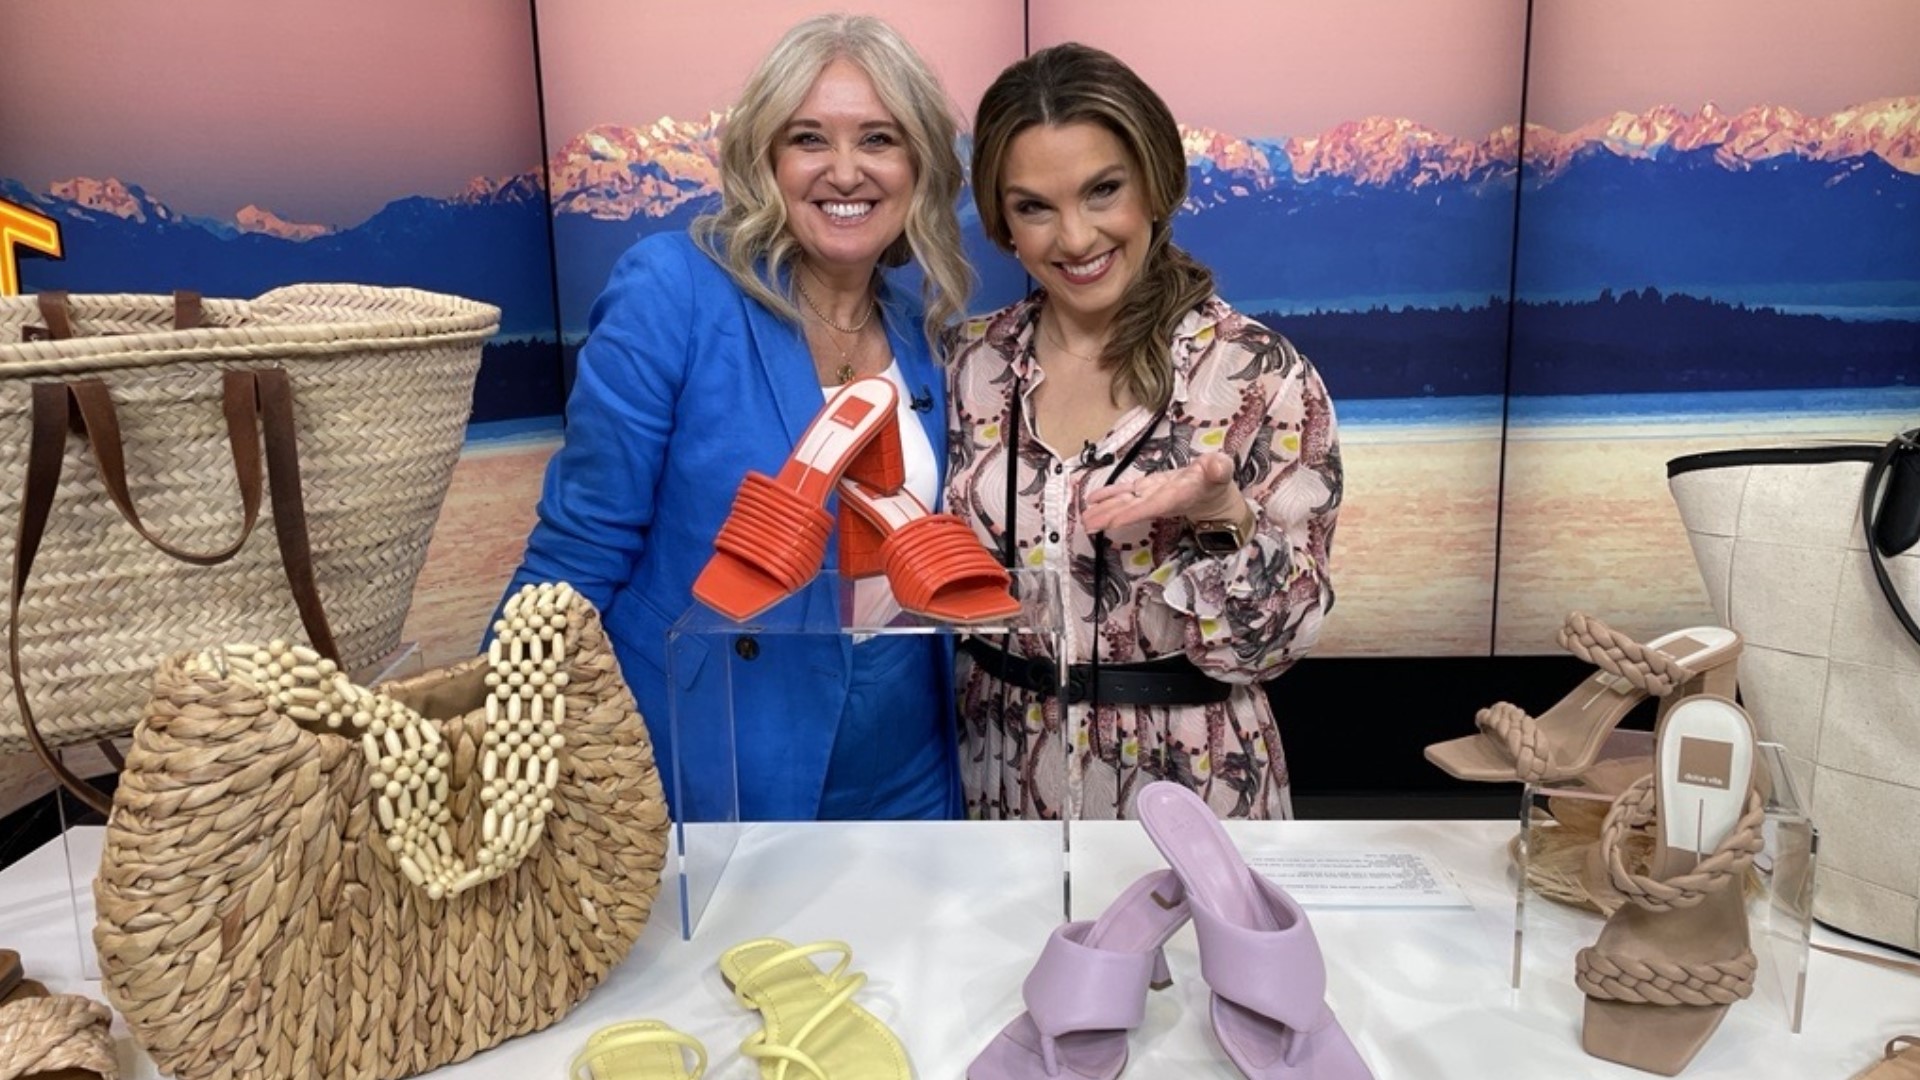 Fashion blogger Dawn Parsons says yes to Coastal Grandmother, colorful sandals, and raffia as you update your summer look. #newdaynw